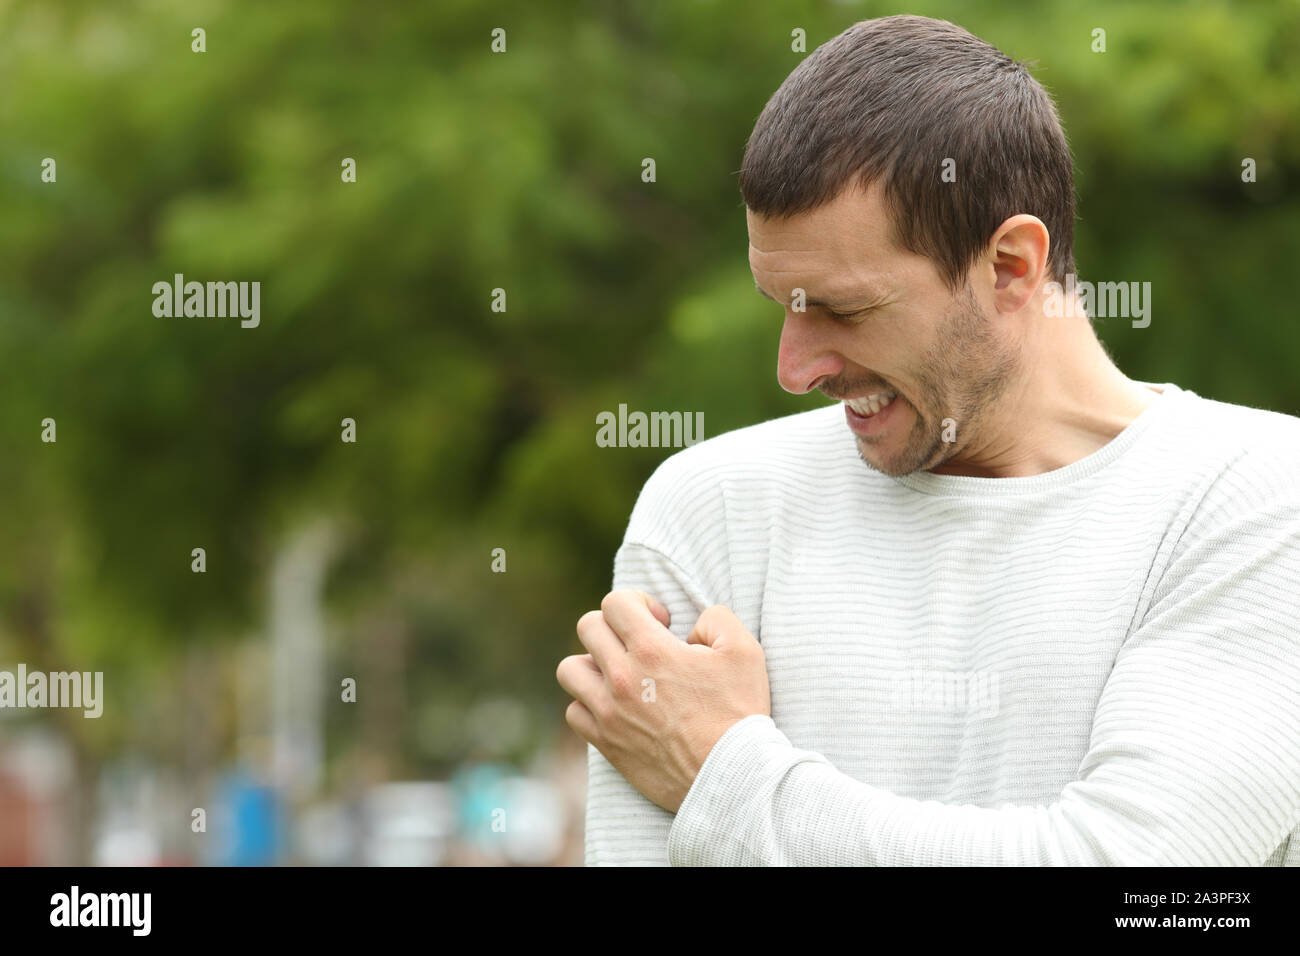 Man suffering itching cratching arm standing in a park Stock Photo